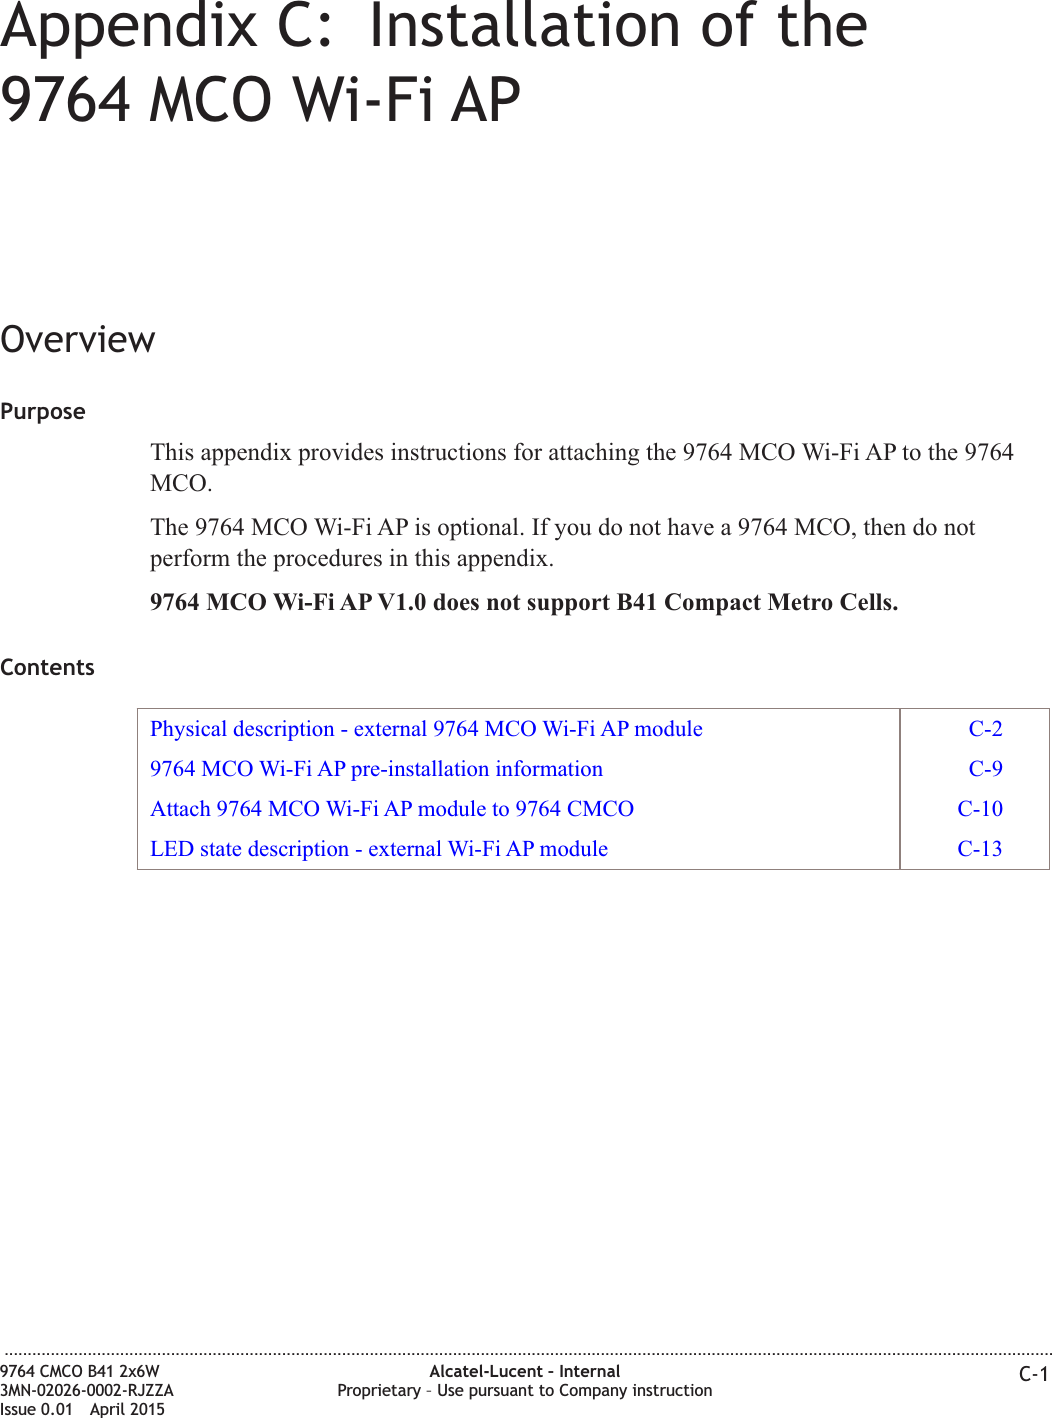 Appendix C: Installation of the9764 MCO Wi-Fi APOverviewPurposeThis appendix provides instructions for attaching the 9764 MCO Wi-Fi AP to the 9764MCO.The 9764 MCO Wi-Fi AP is optional. If you do not have a 9764 MCO, then do notperform the procedures in this appendix.9764 MCO Wi-Fi AP V1.0 does not support B41 Compact Metro Cells.ContentsPhysical description - external 9764 MCO Wi-Fi AP module C-29764 MCO Wi-Fi AP pre-installation information C-9Attach 9764 MCO Wi-Fi AP module to 9764 CMCO C-10LED state description - external Wi-Fi AP module C-13...................................................................................................................................................................................................................................9764 CMCO B41 2x6W3MN-02026-0002-RJZZAIssue 0.01 April 2015Alcatel-Lucent – InternalProprietary – Use pursuant to Company instruction C-1PRELIMINARYPRELIMINARY